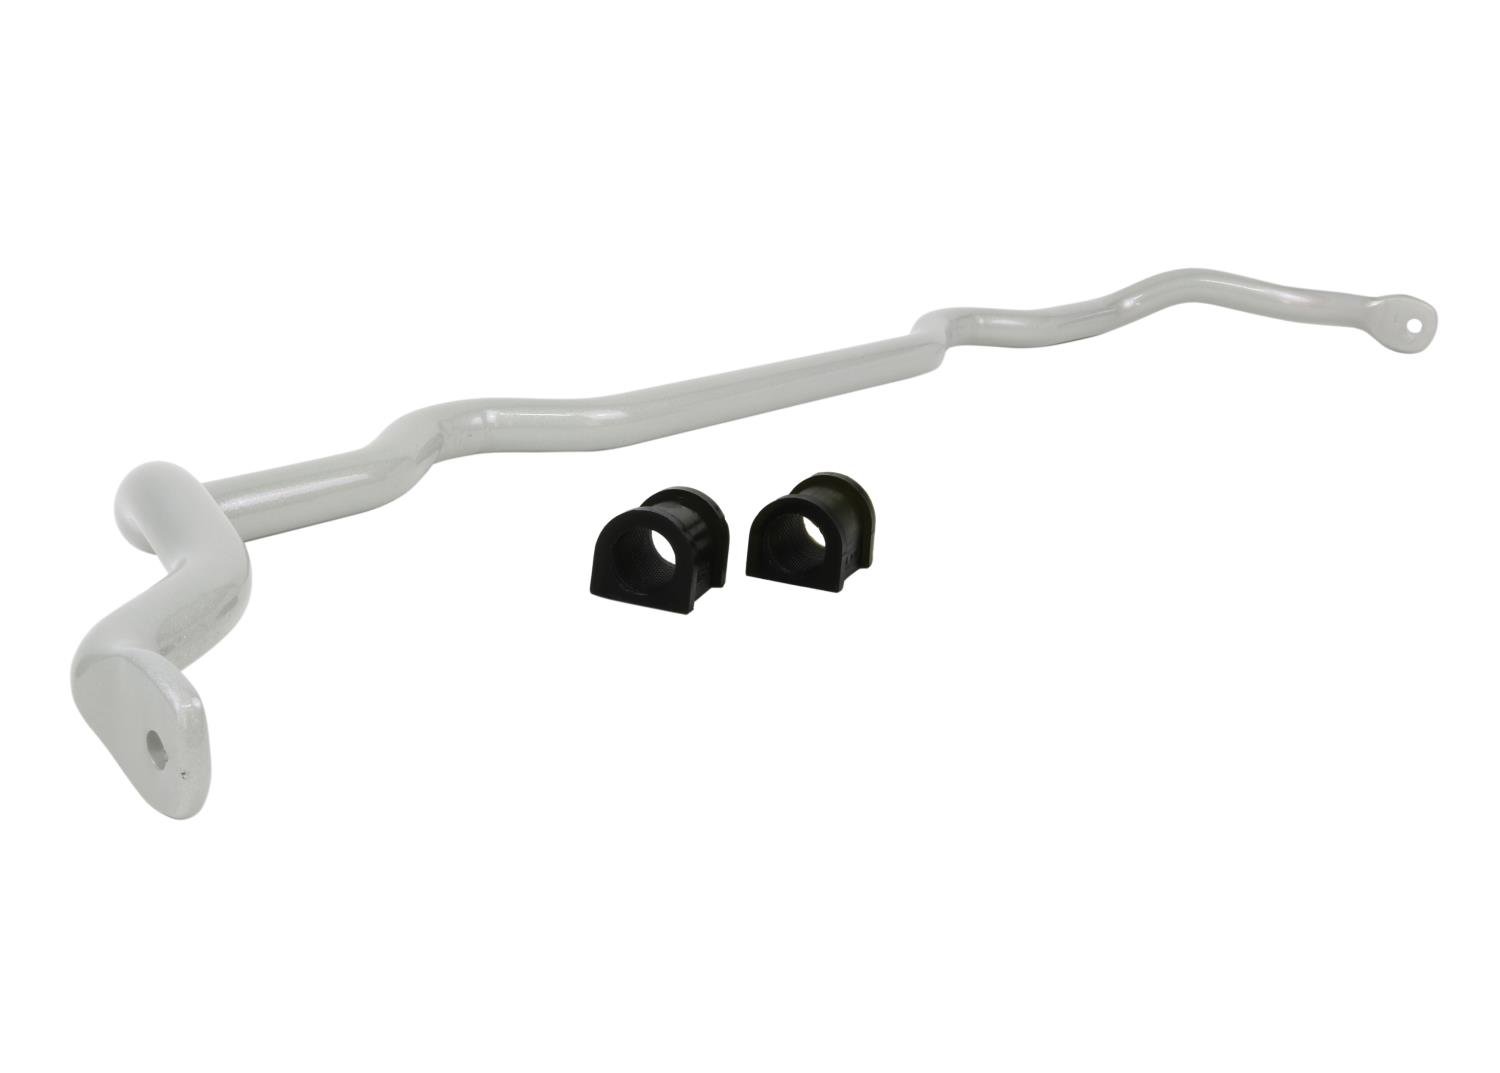 BTF38 Front 24 mm Heavy Duty Fixed Sway Bar for 1997-2002 Toyota Camry MCV20, SXV20, SXV23